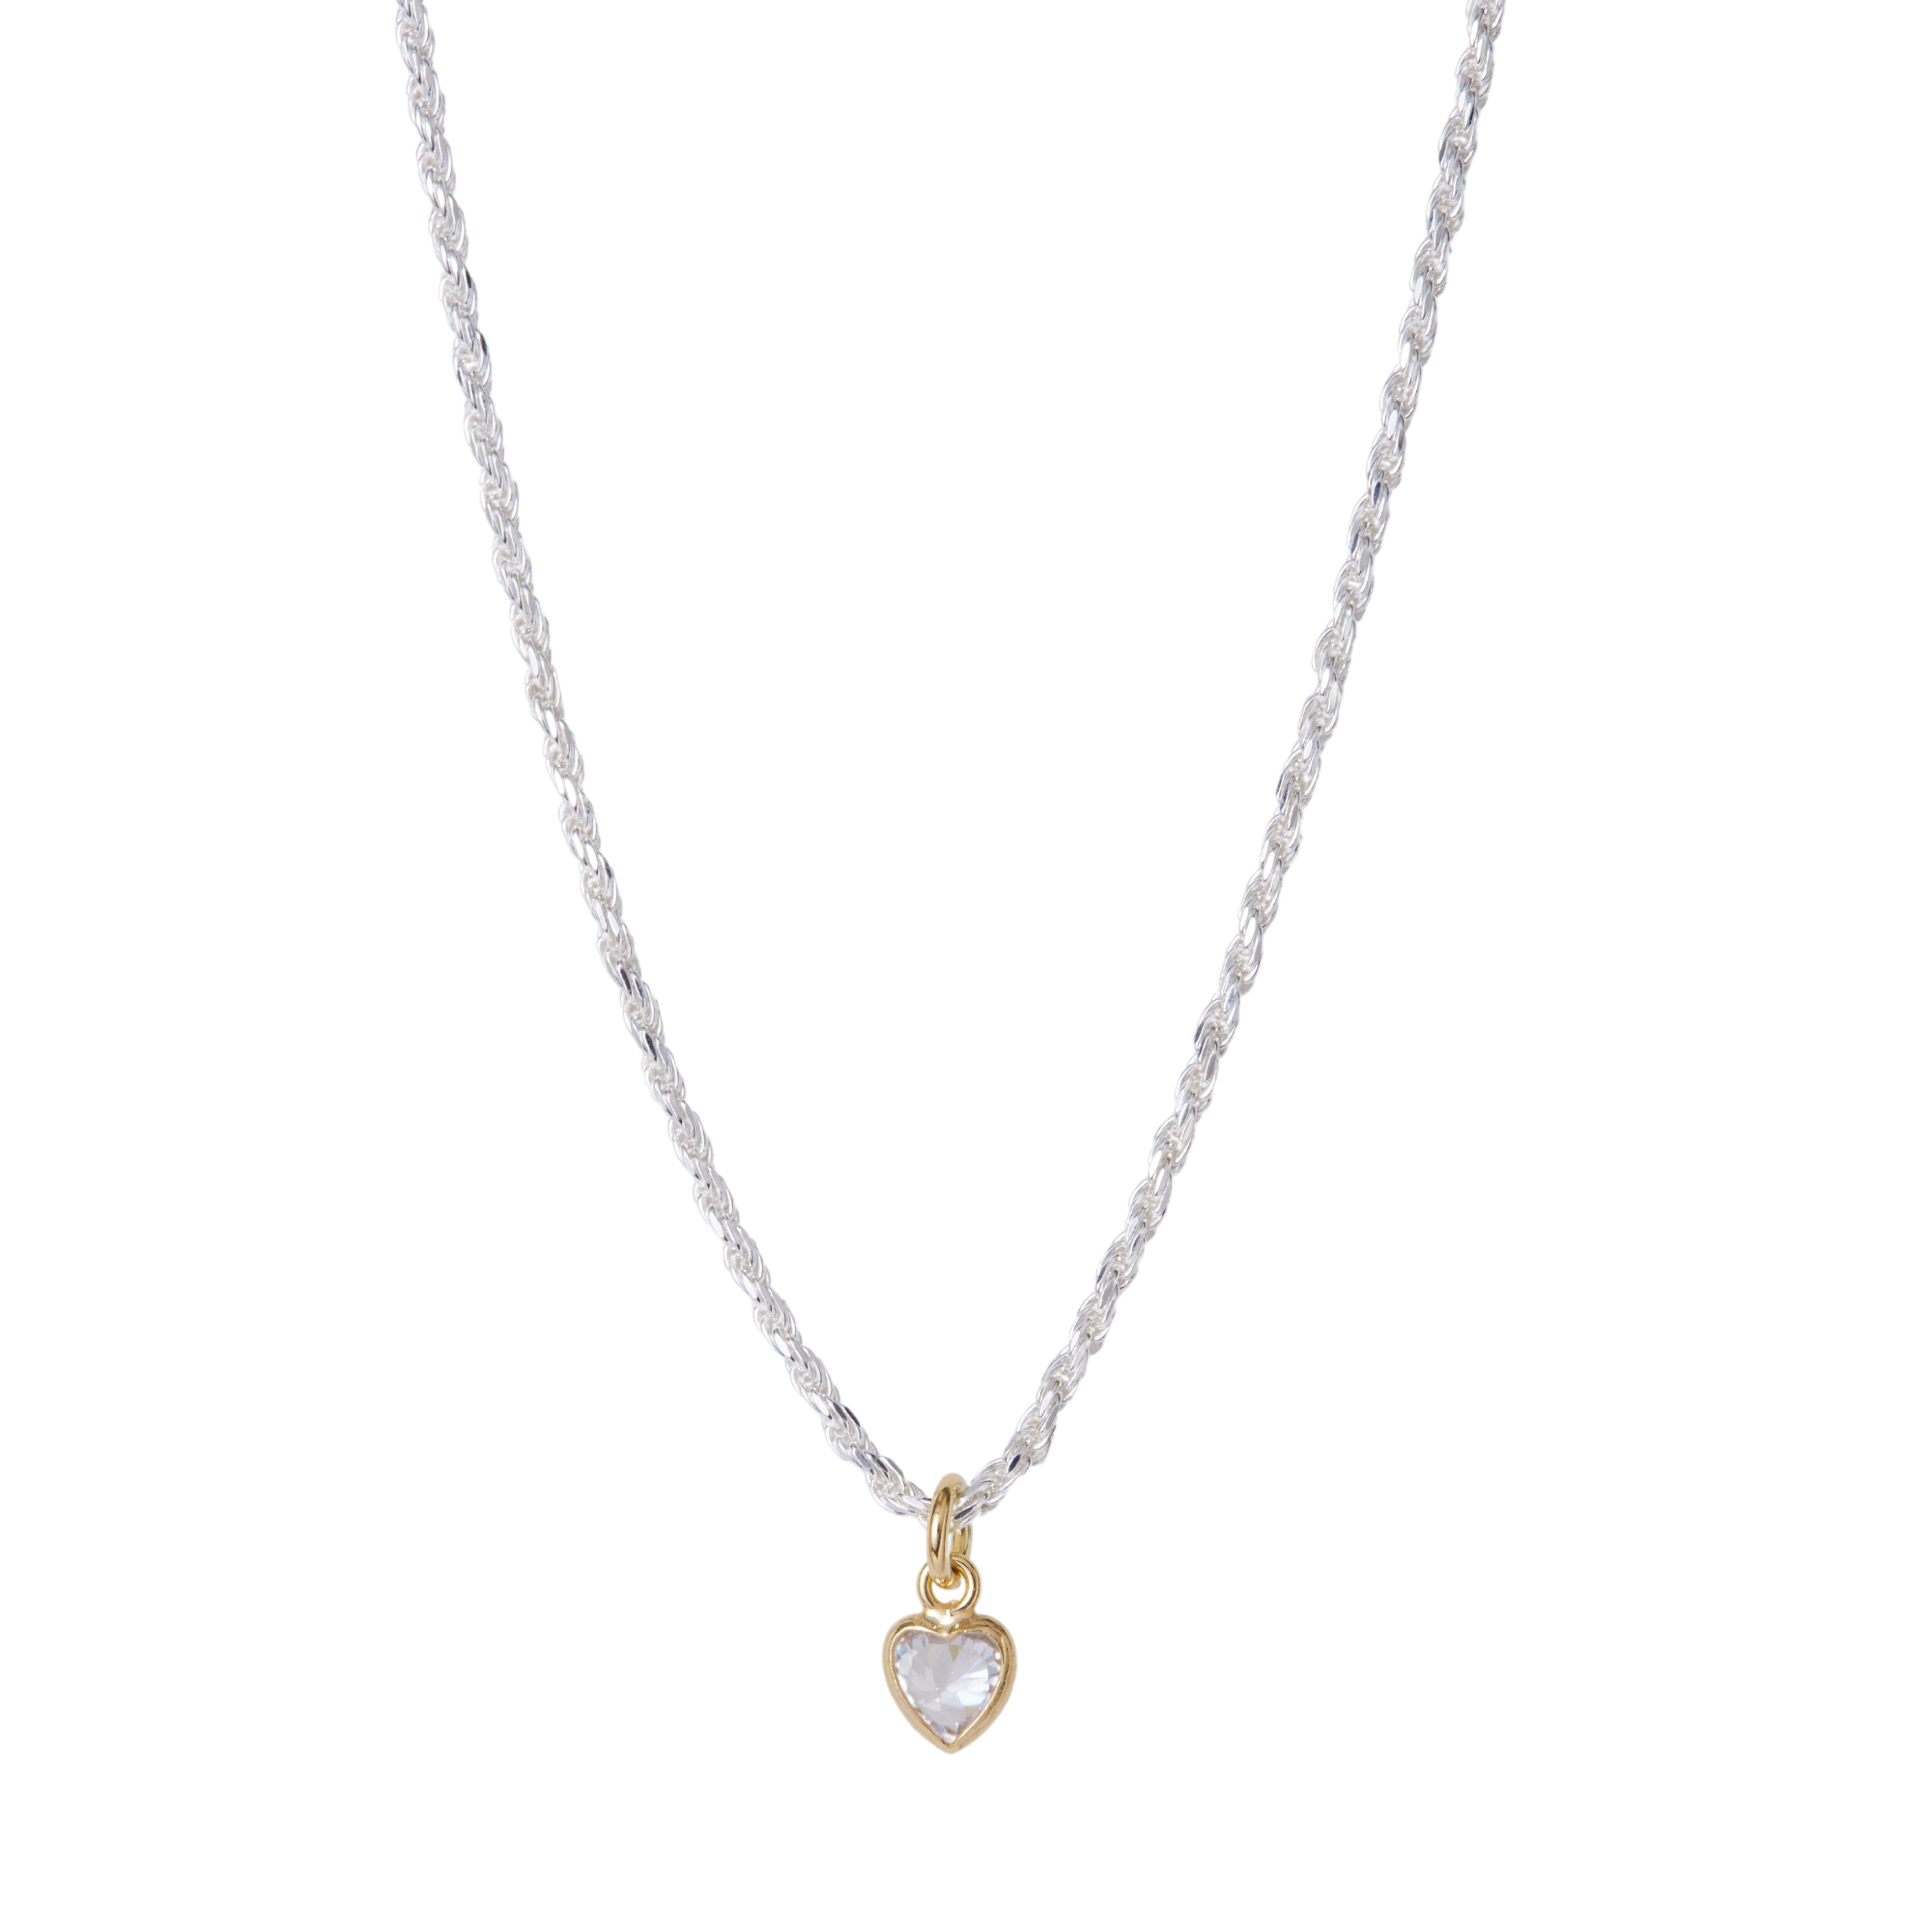 THE CZ HEART ROPE NECKLACE